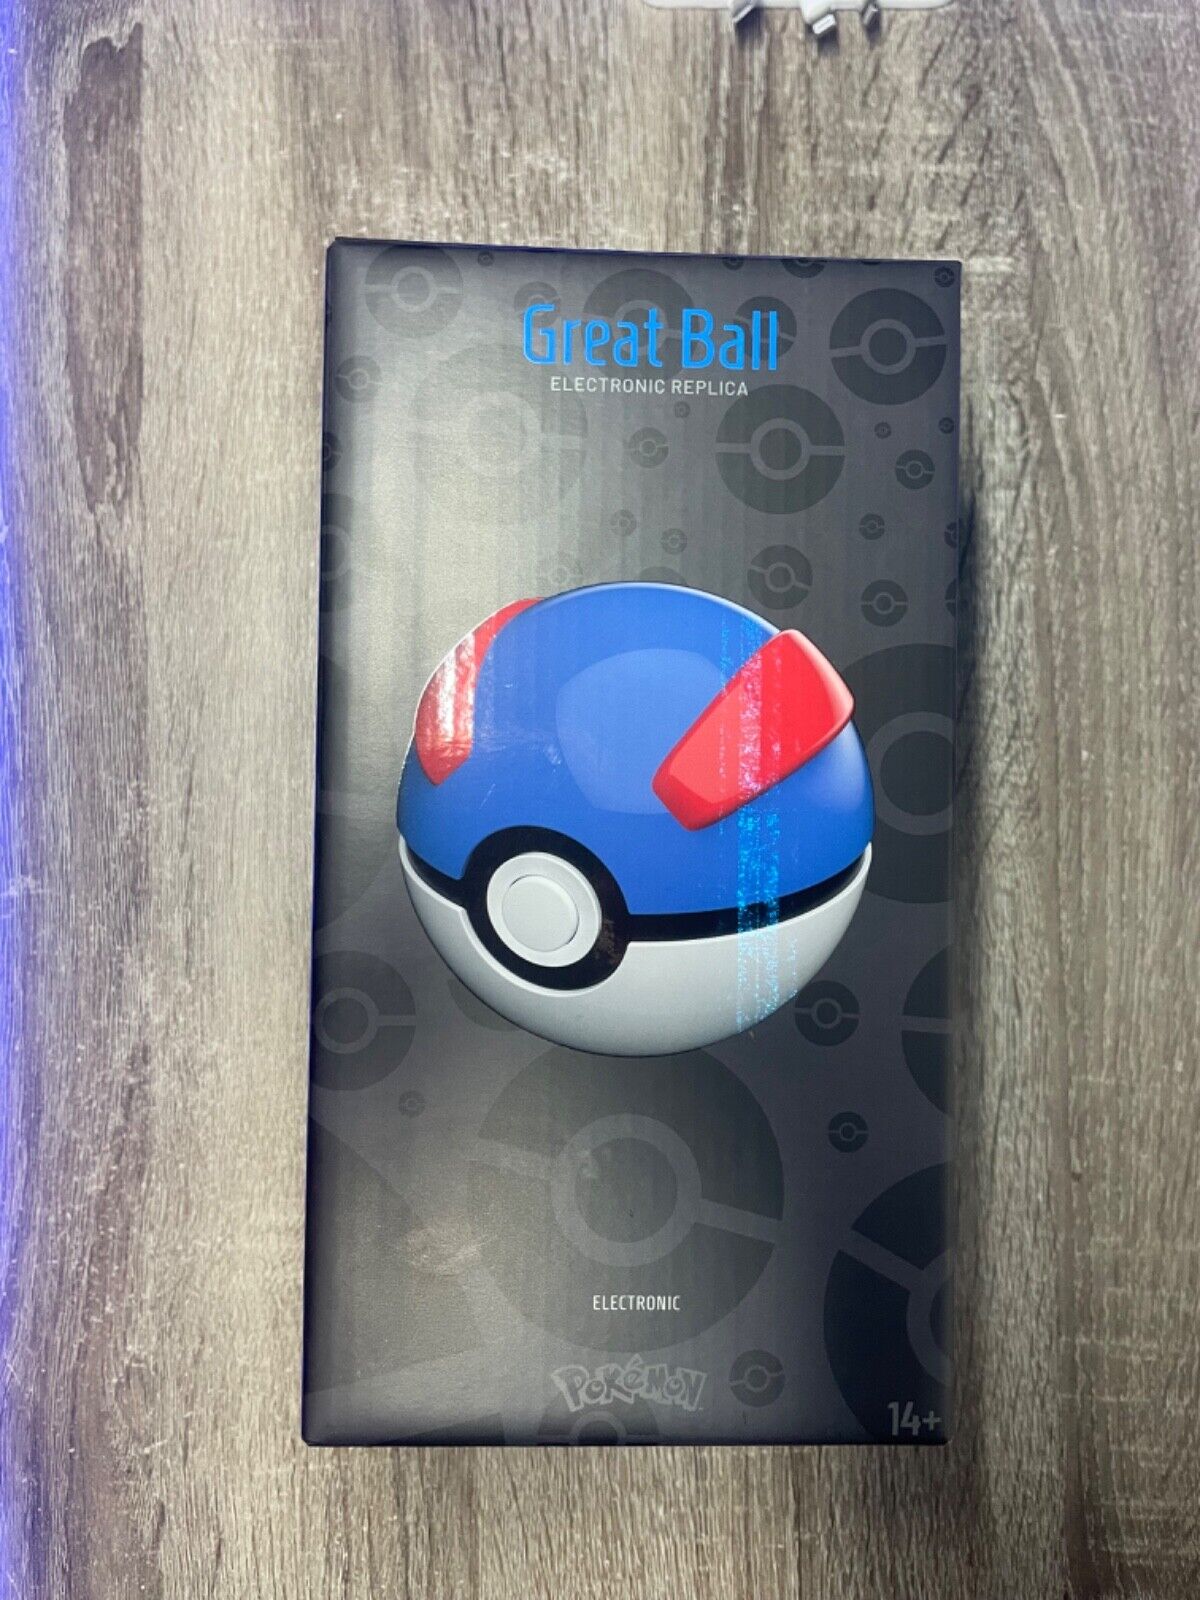 Pokemon Great Ball Die-Cast Replica by The Wand Company - New Open Box